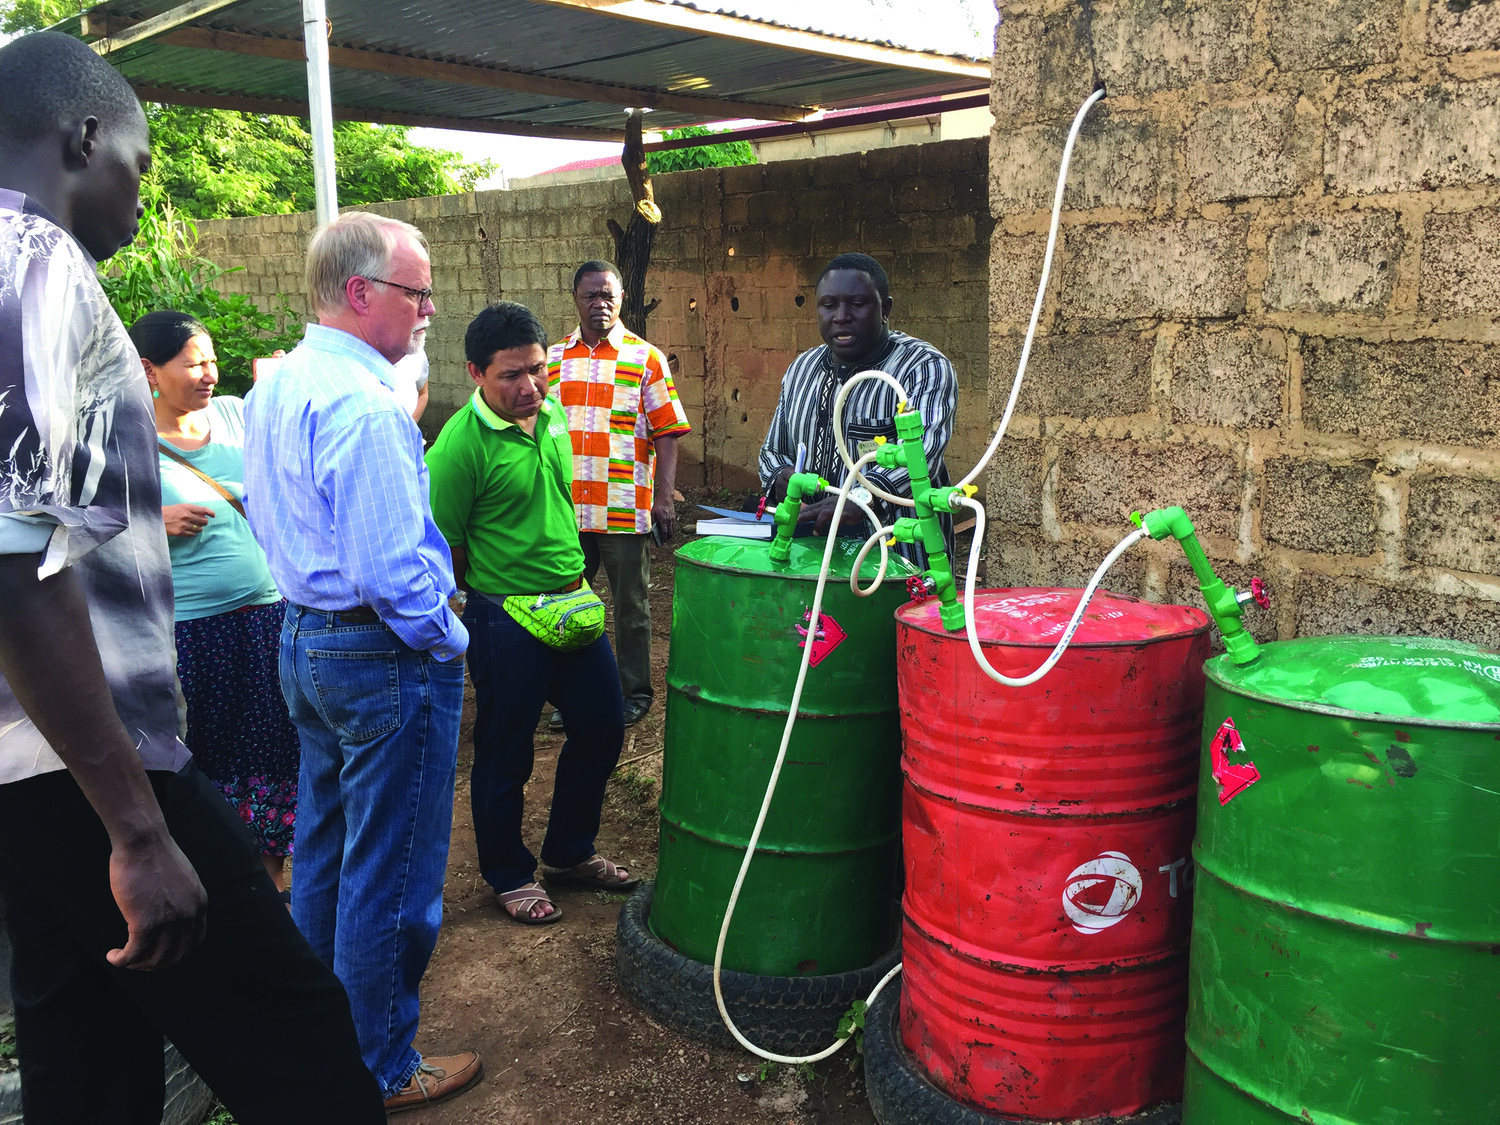 David Erickson in 2018 with staff from ECHO’s Regional Impact Centers
learning about biogas production in Burkina Faso, West Africa.